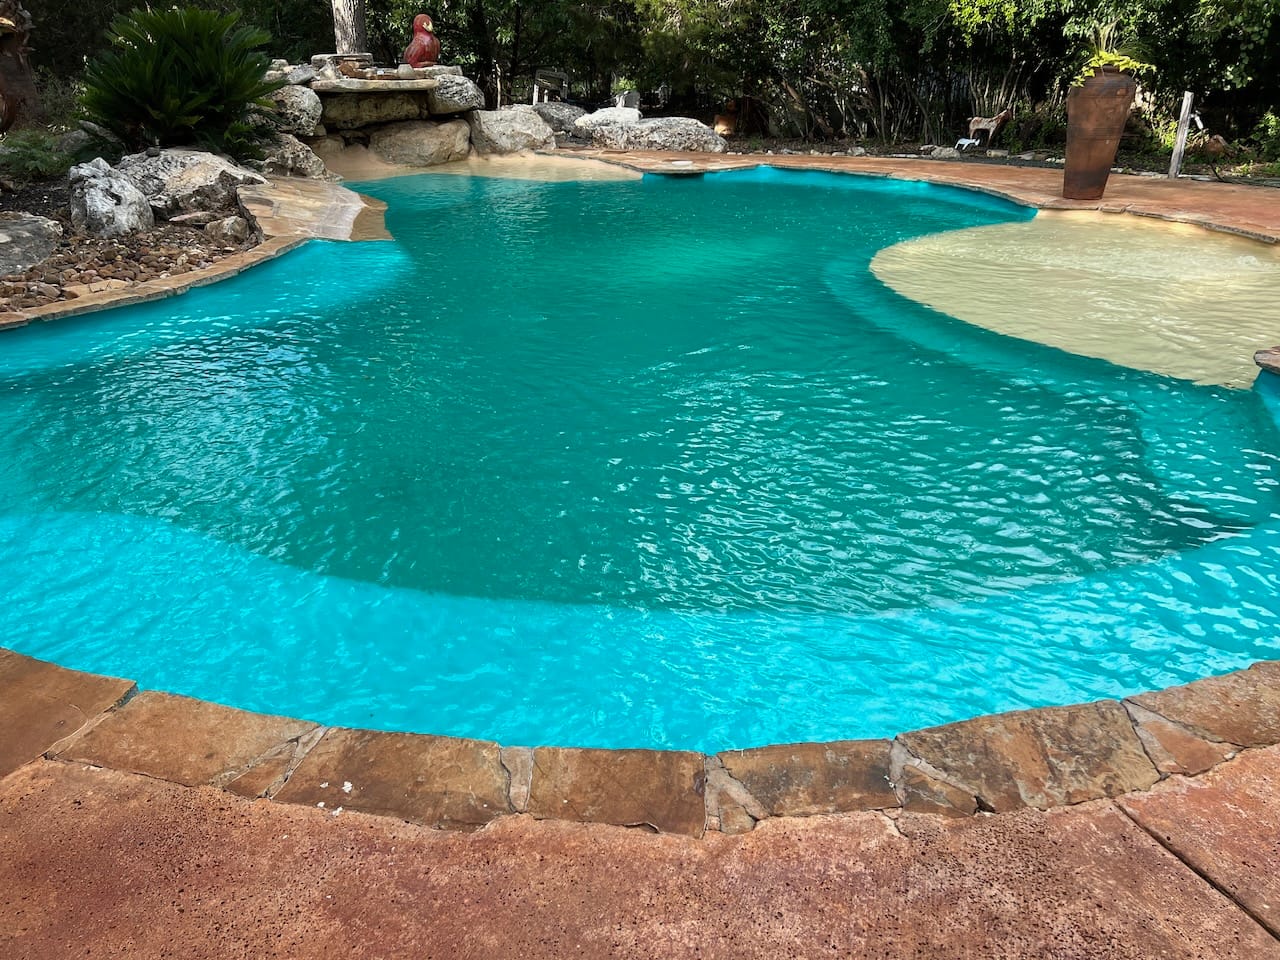 Here is the final result after new paint, fresh water, and replacing our pool sand filter. The water is crystal clear and ready for summer. What a difference!